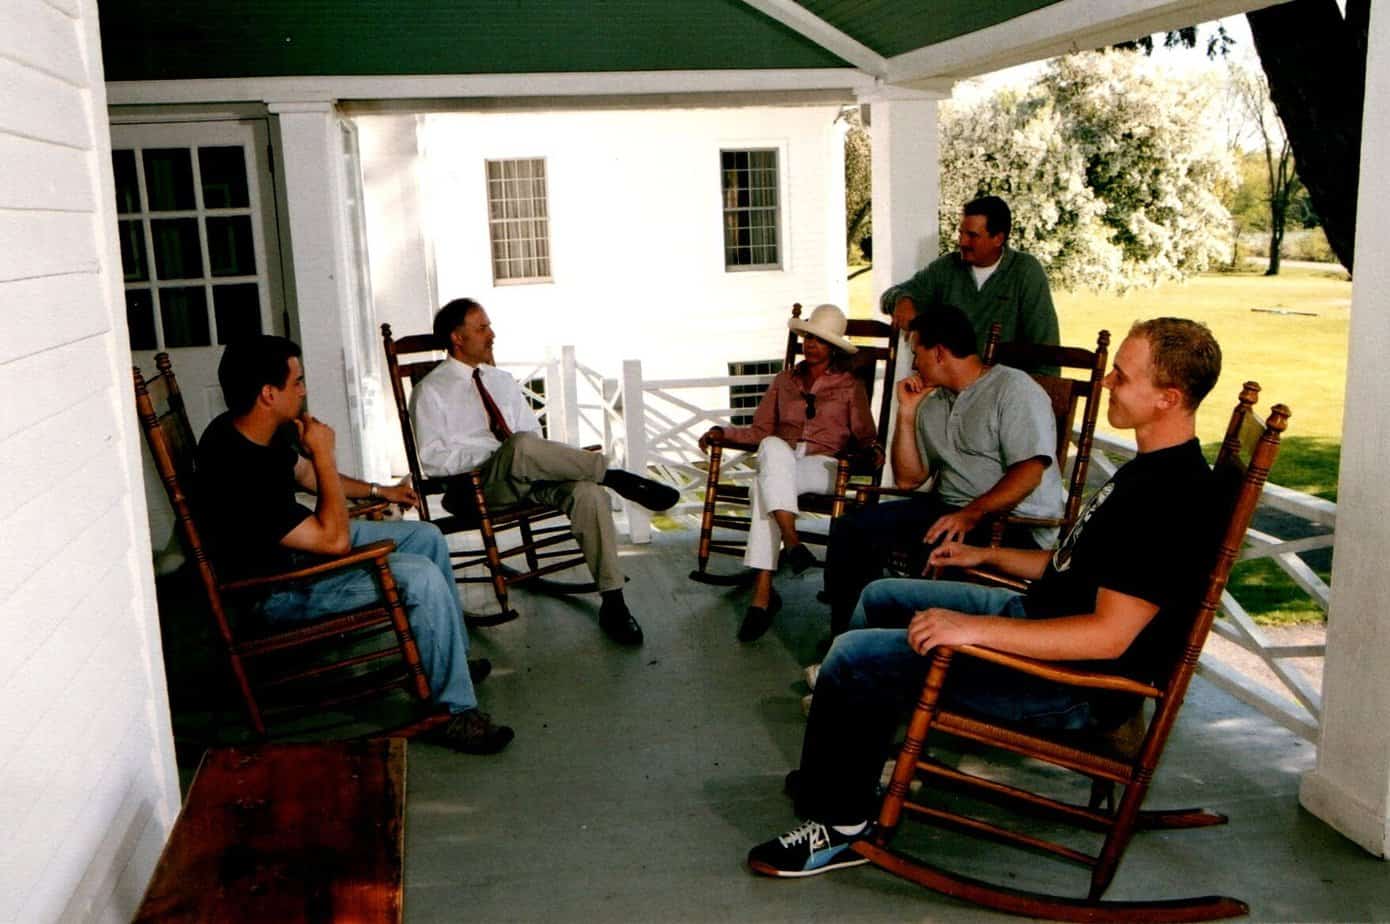 A group meeting on a porch.